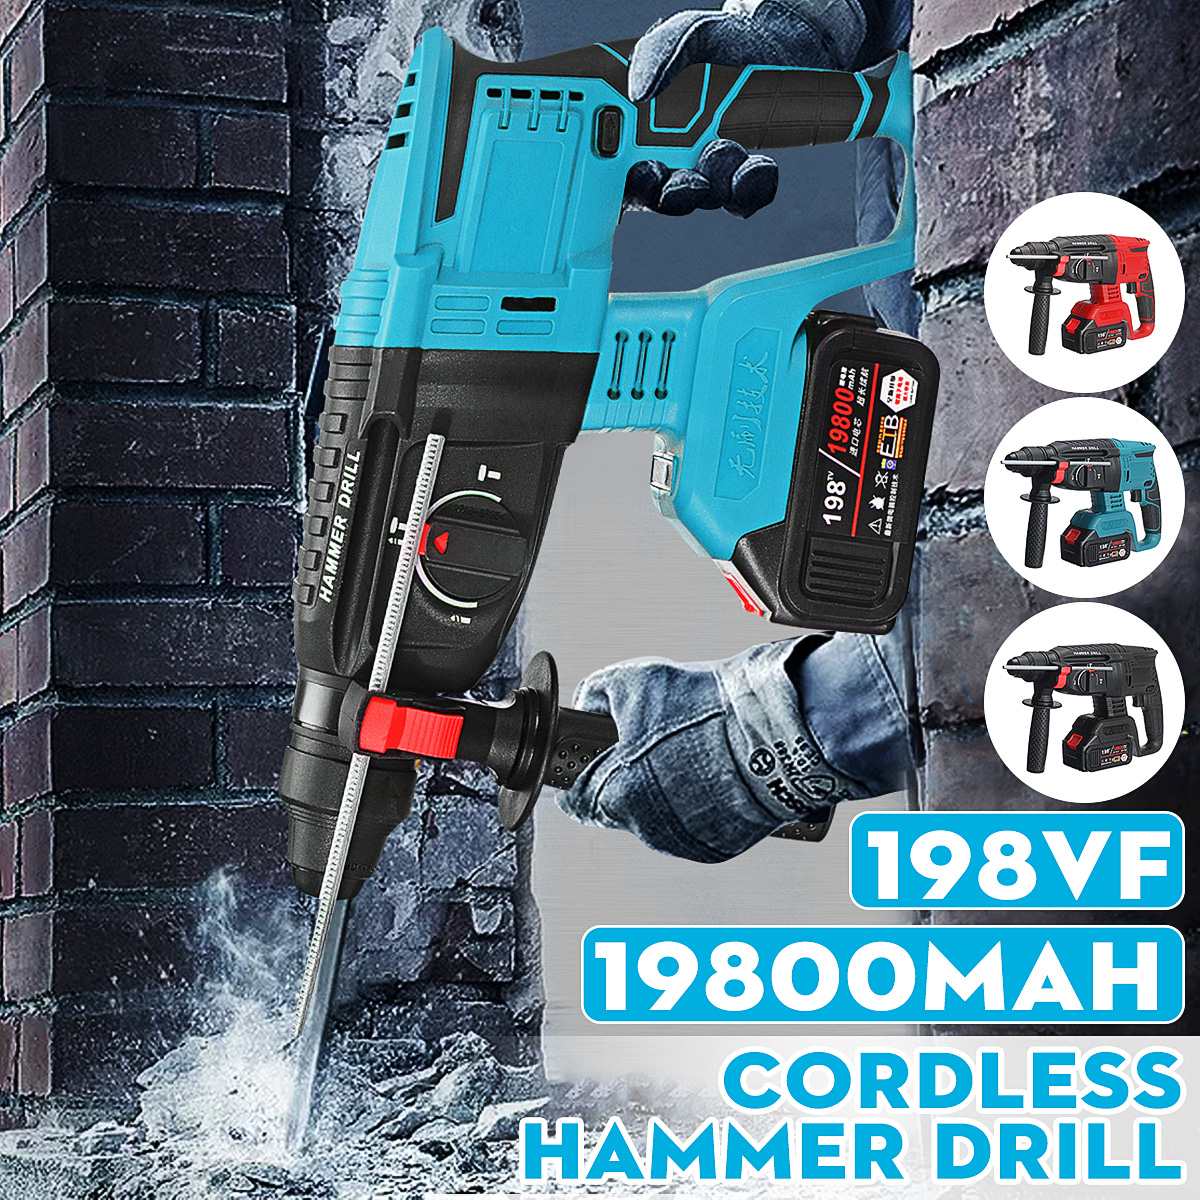 21V Brushless Electric Rotary Hammer Rechargeable Multifunction Electric Hammer Impact Power Drill Tool with 19800mAh Battery